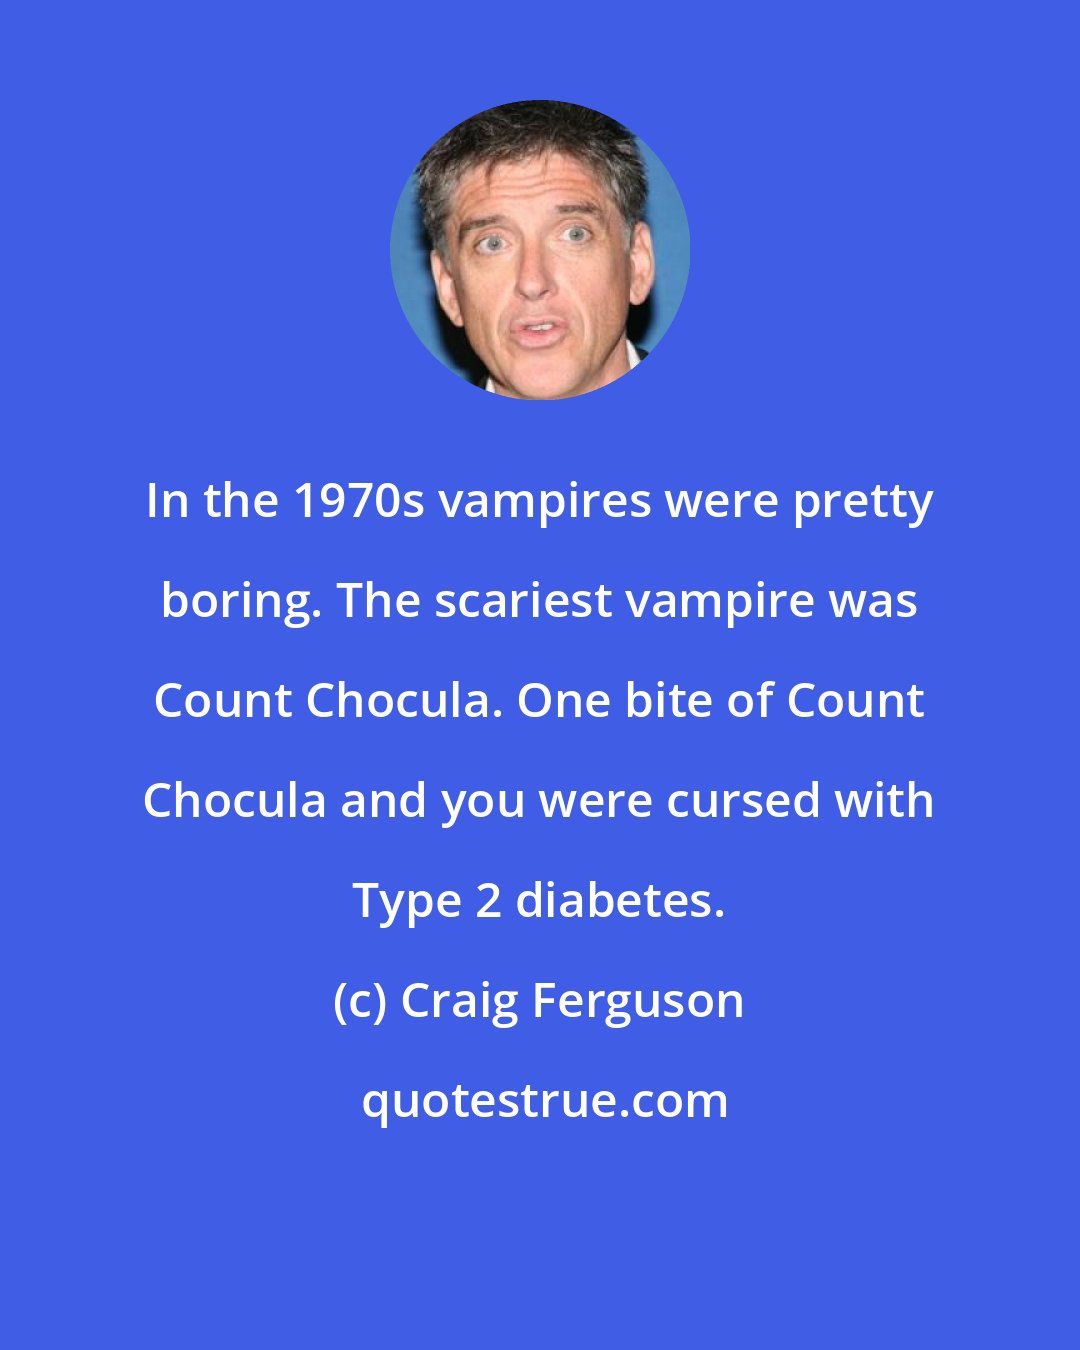 Craig Ferguson: In the 1970s vampires were pretty boring. The scariest vampire was Count Chocula. One bite of Count Chocula and you were cursed with Type 2 diabetes.